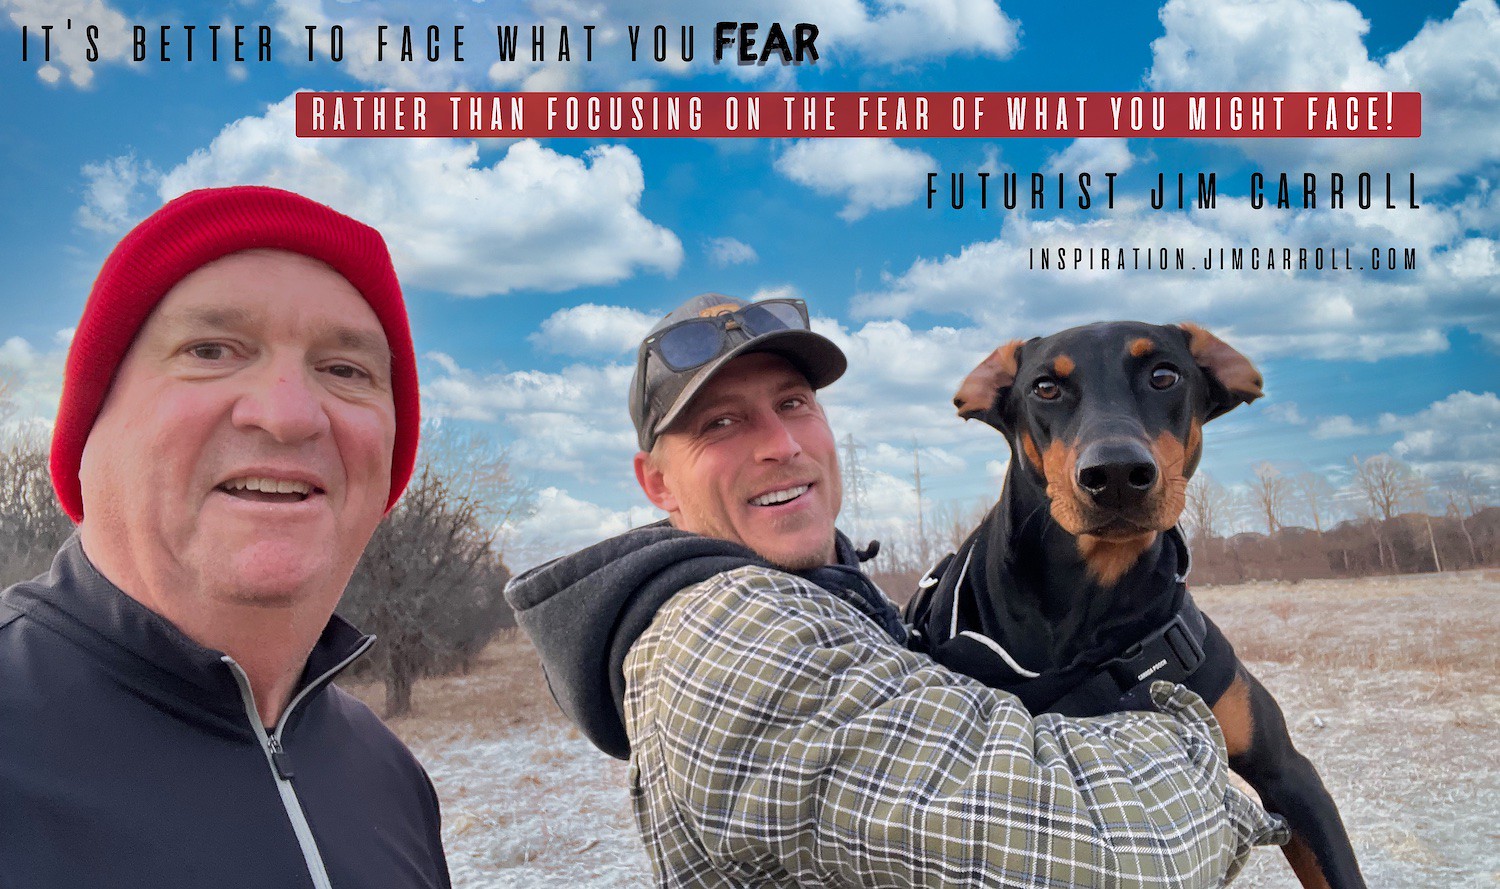 "It's better to face what you fear rather than focusing on the fear of what you might face!" - Futurist Jim Carroll